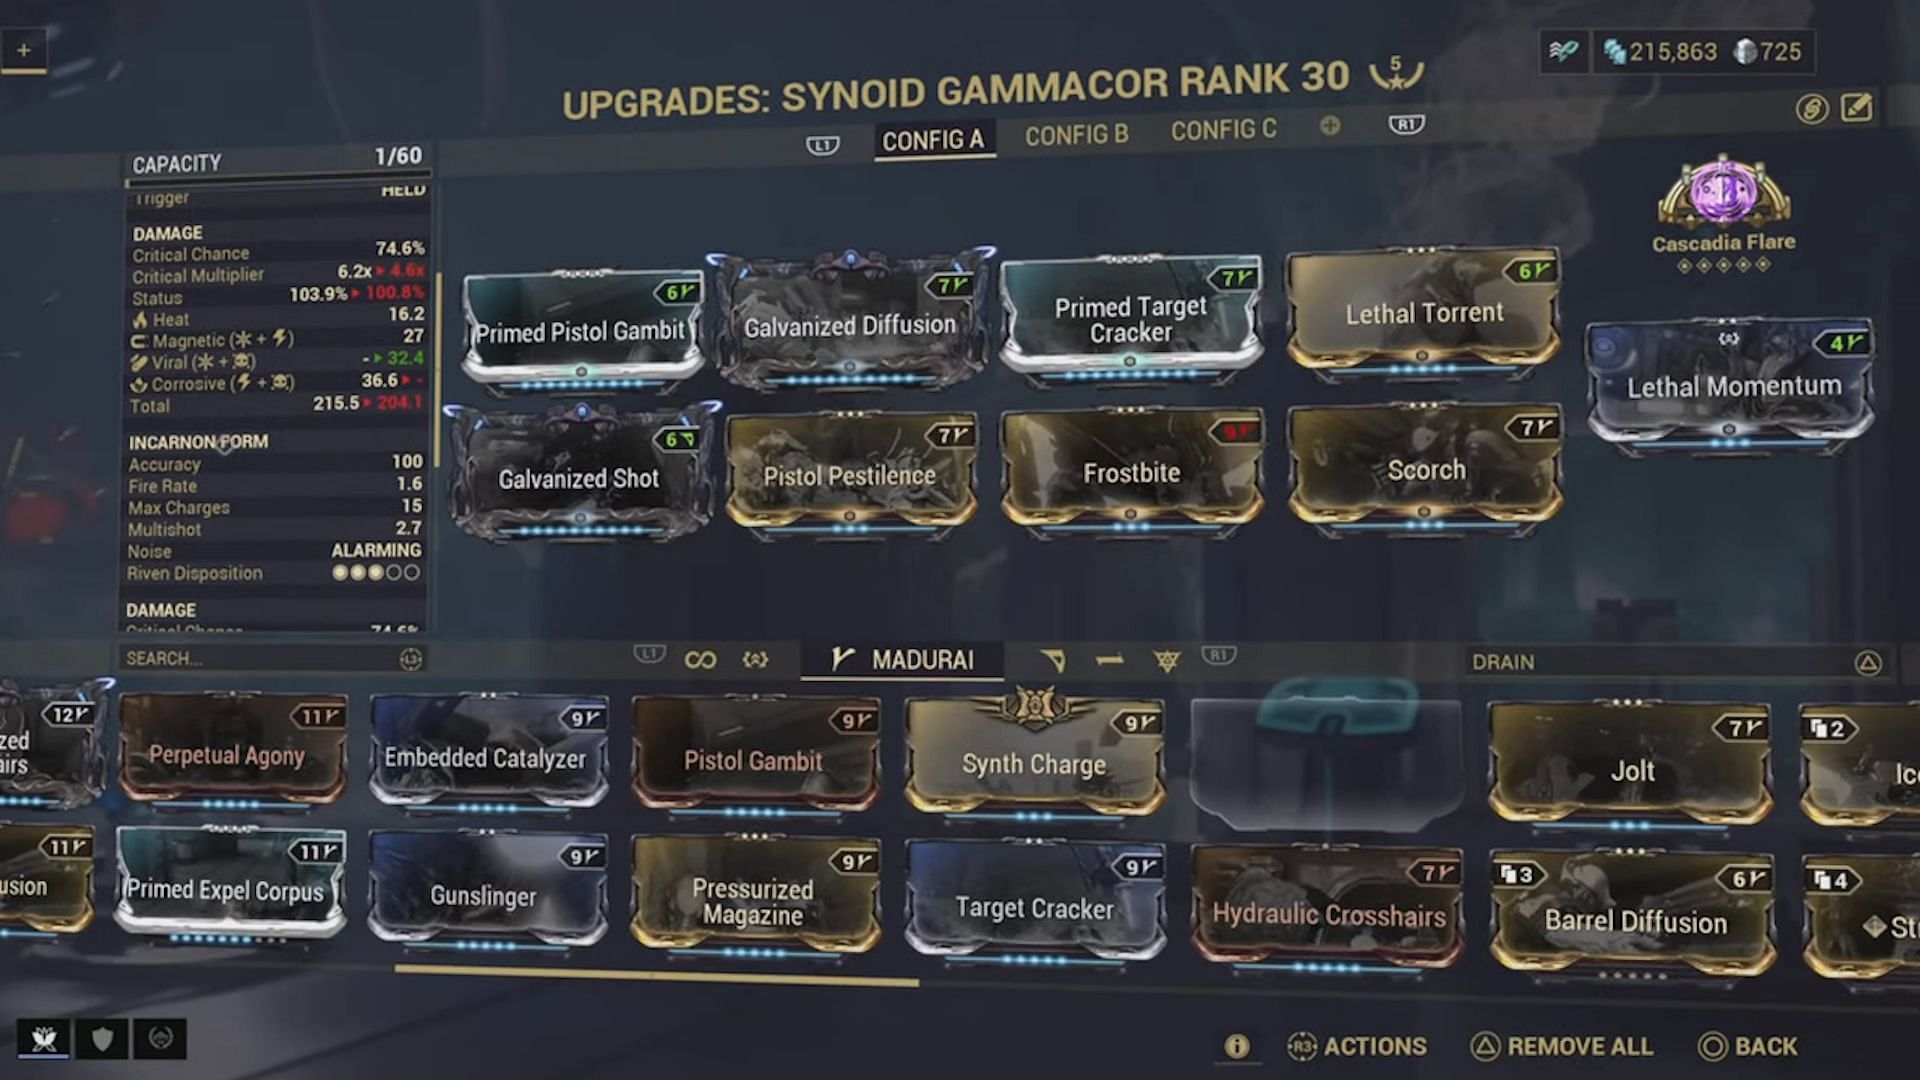 A standard build on Synoid Gammacor with critical Incarnon perks can benefit from the Cascadia Flare arcane (Image via Digital Extremes)